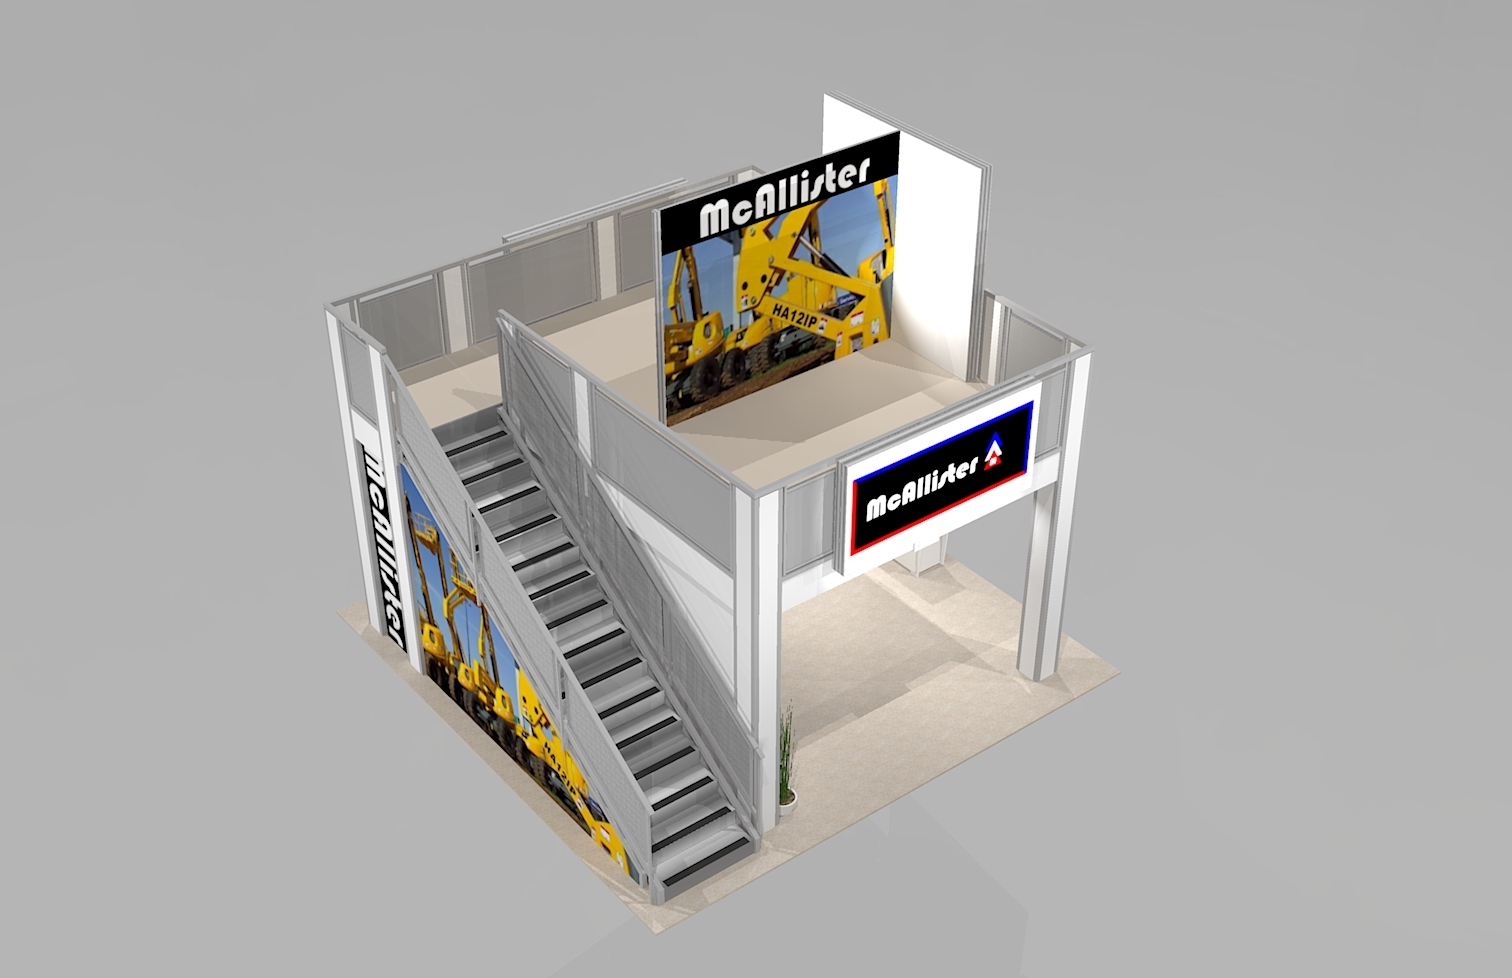 Two Story Rental Exhibit for 20 ft Trade Show Booth Space with Two Meeting Rooms and Backlit Logo Graphic